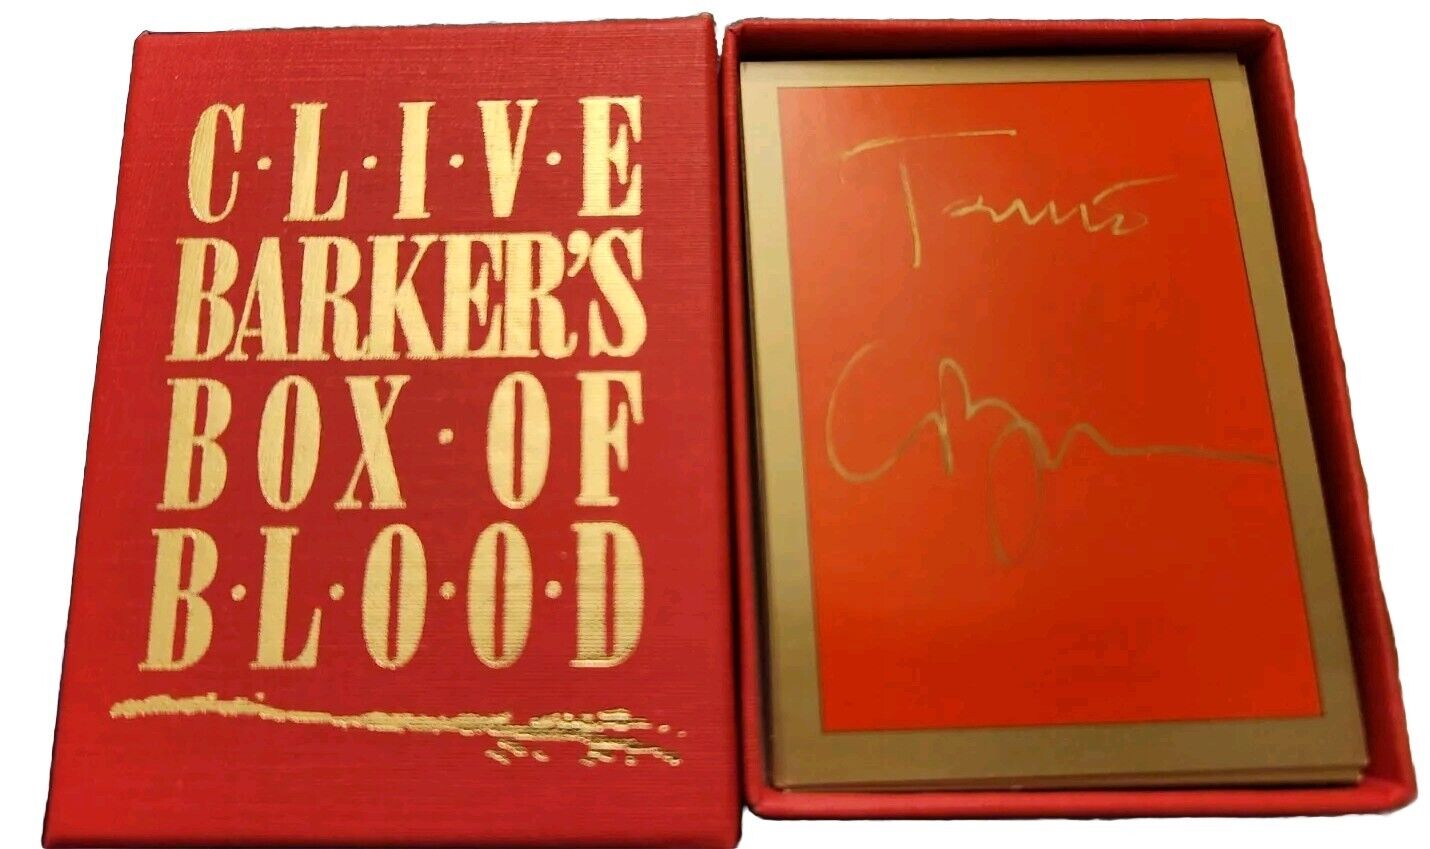 RARE Clive Barker's Box of Blood Signed X 2 Limited #609/1000 Set Of Art Cards